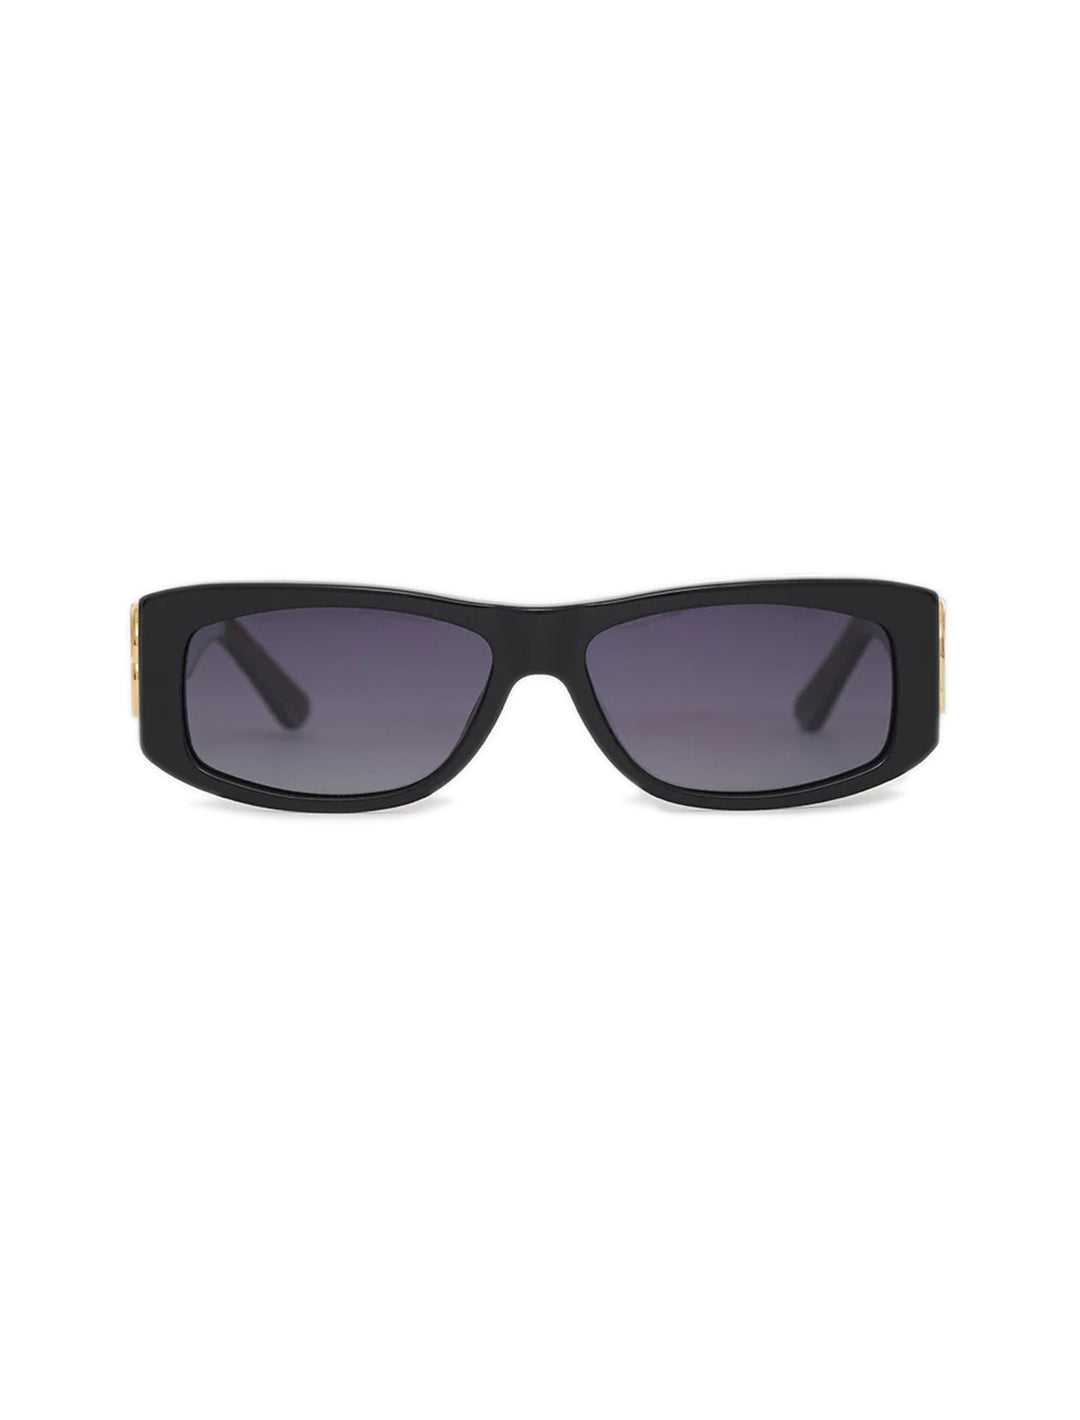 Front view of Anine Bing's siena sunglasses in black and gold.